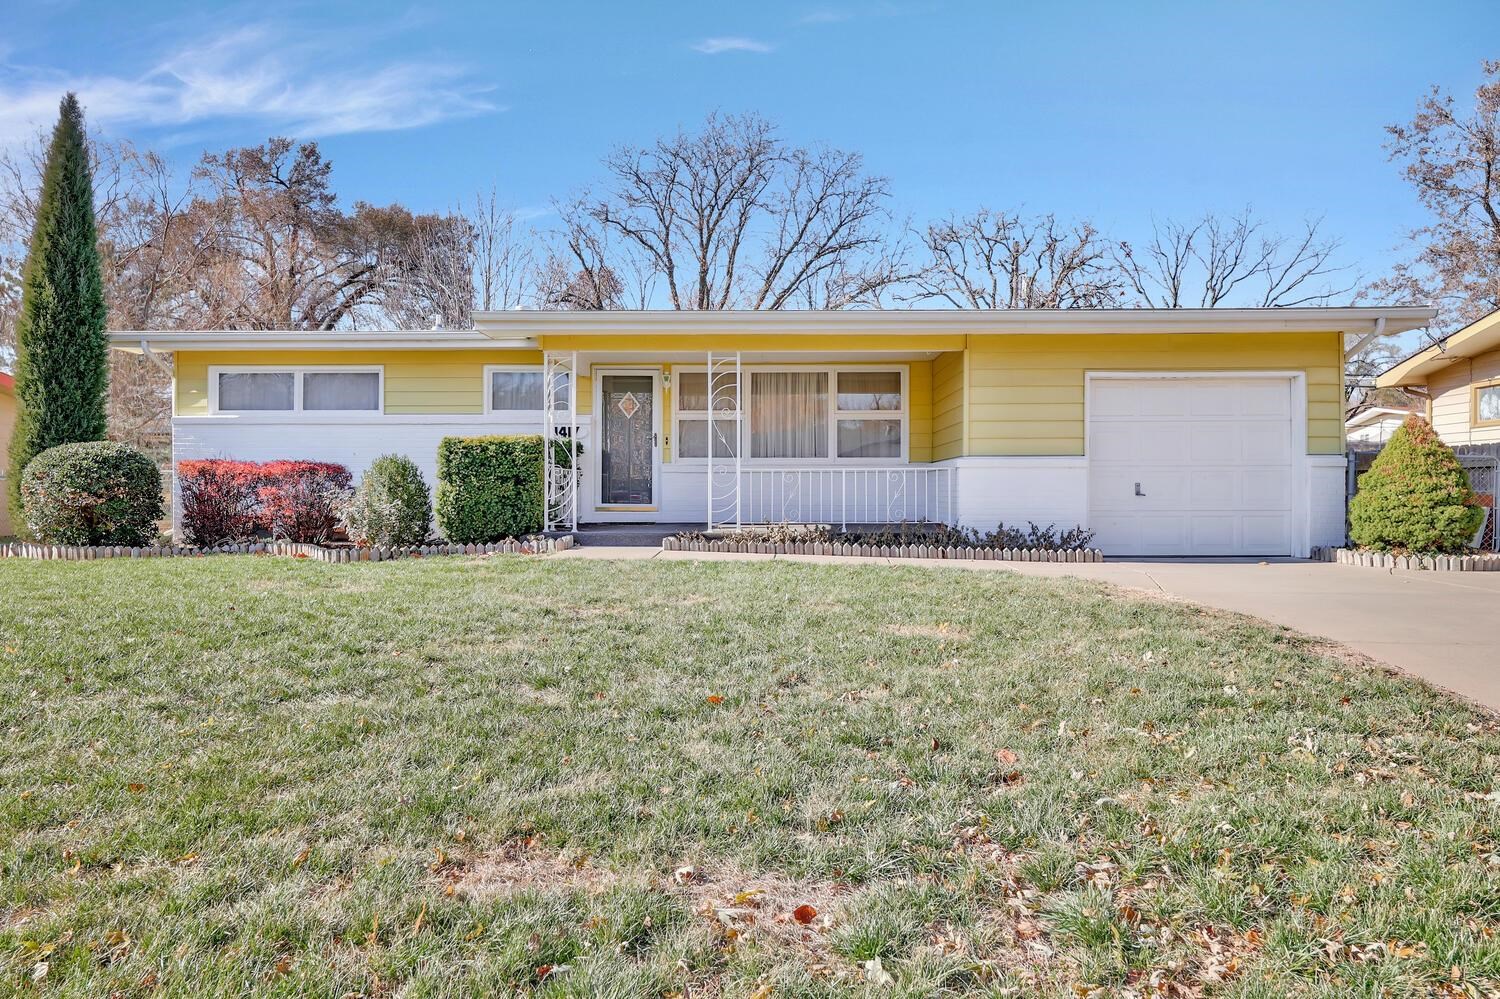 Welcome home! This well maintained 3 bed 2 bath home is ready for its new owners. Neutral paint and 